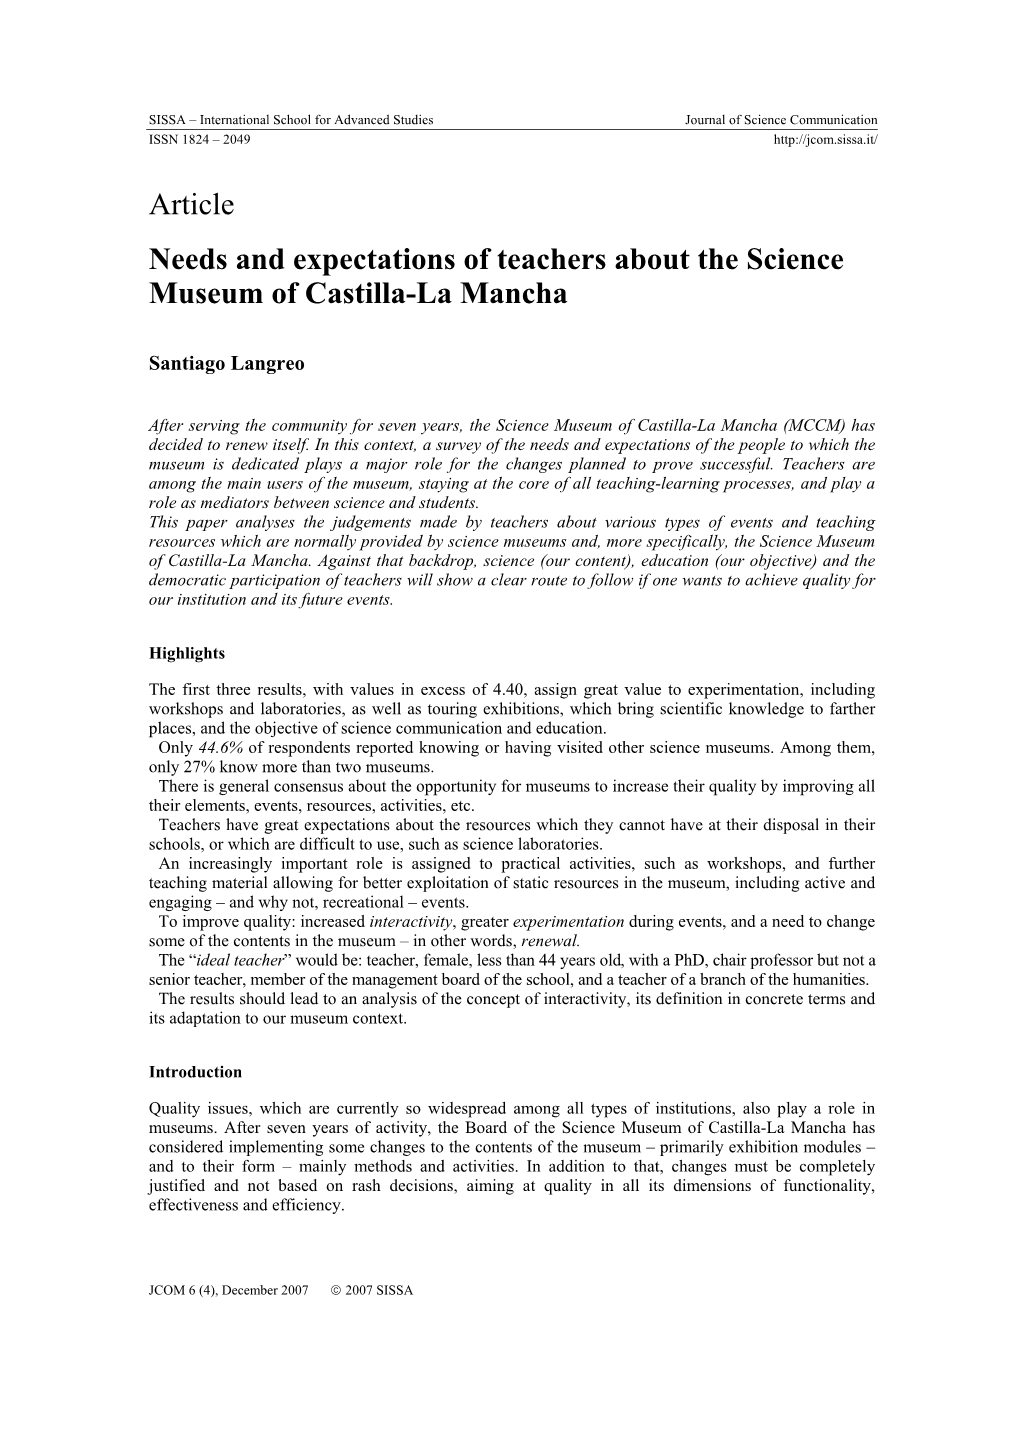 Article Needs and Expectations of Teachers About the Science Museum of Castilla-La Mancha